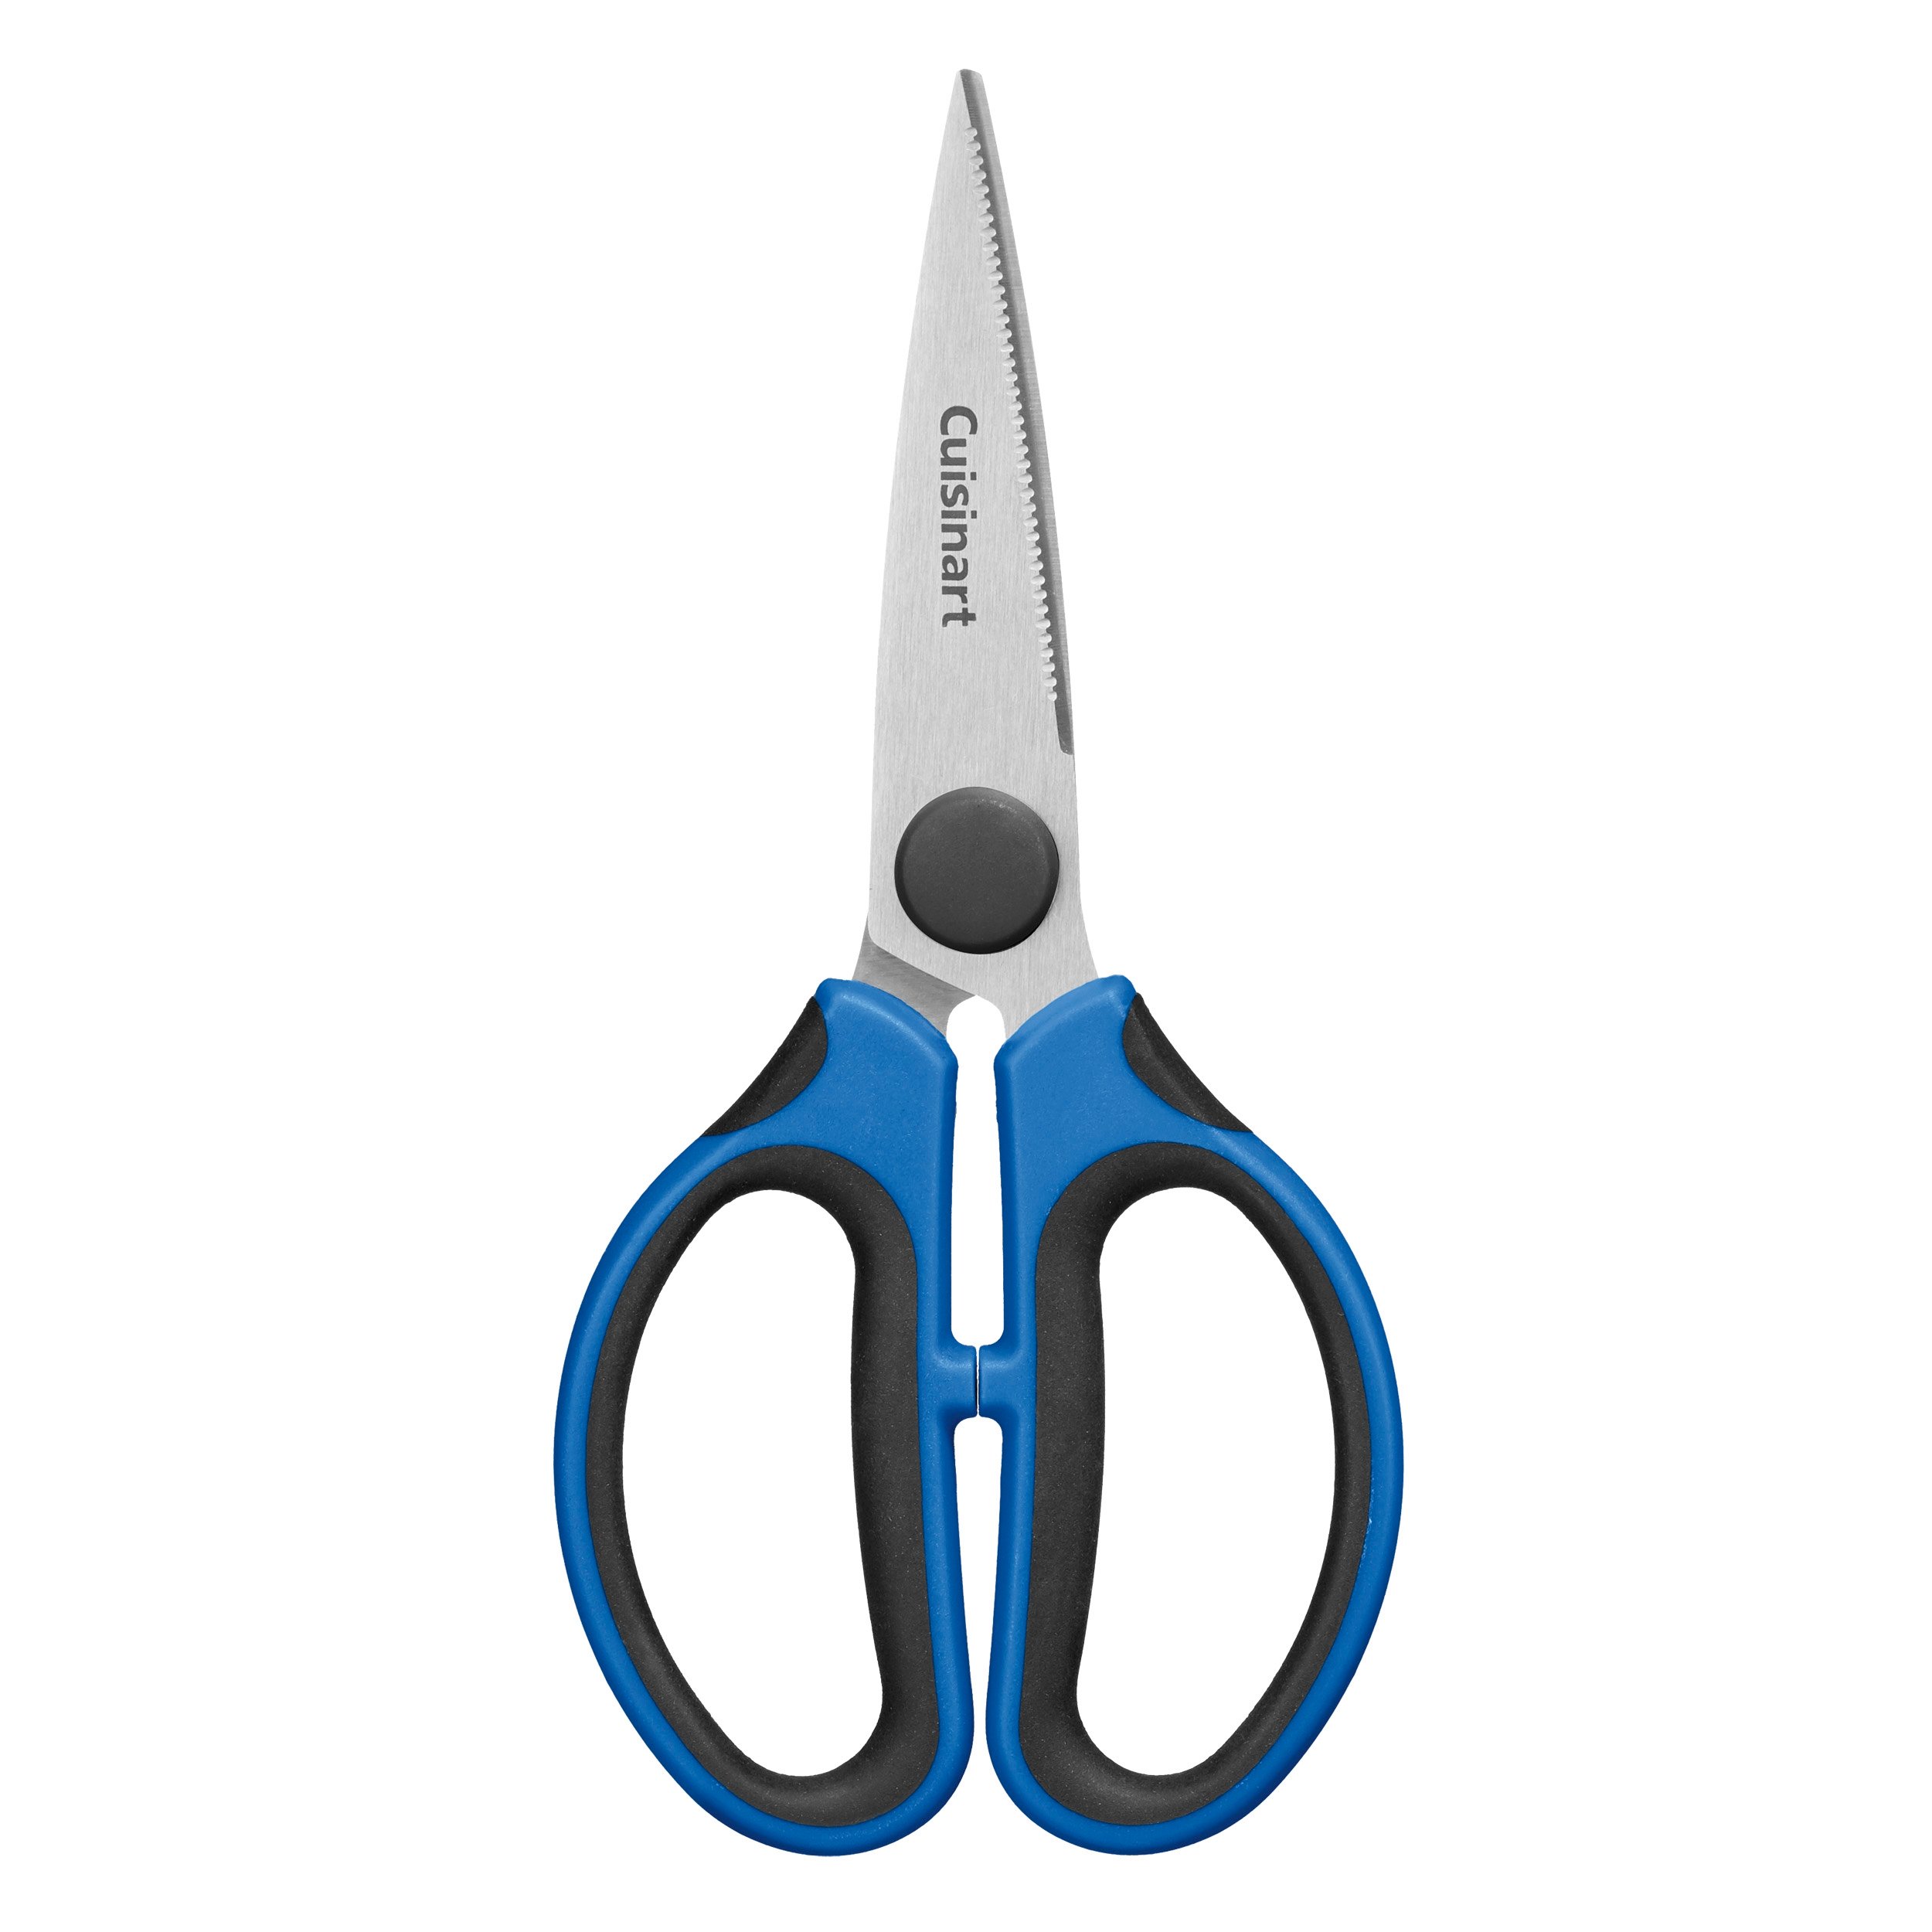 8" Utility Shears with Soft-Grip Handles